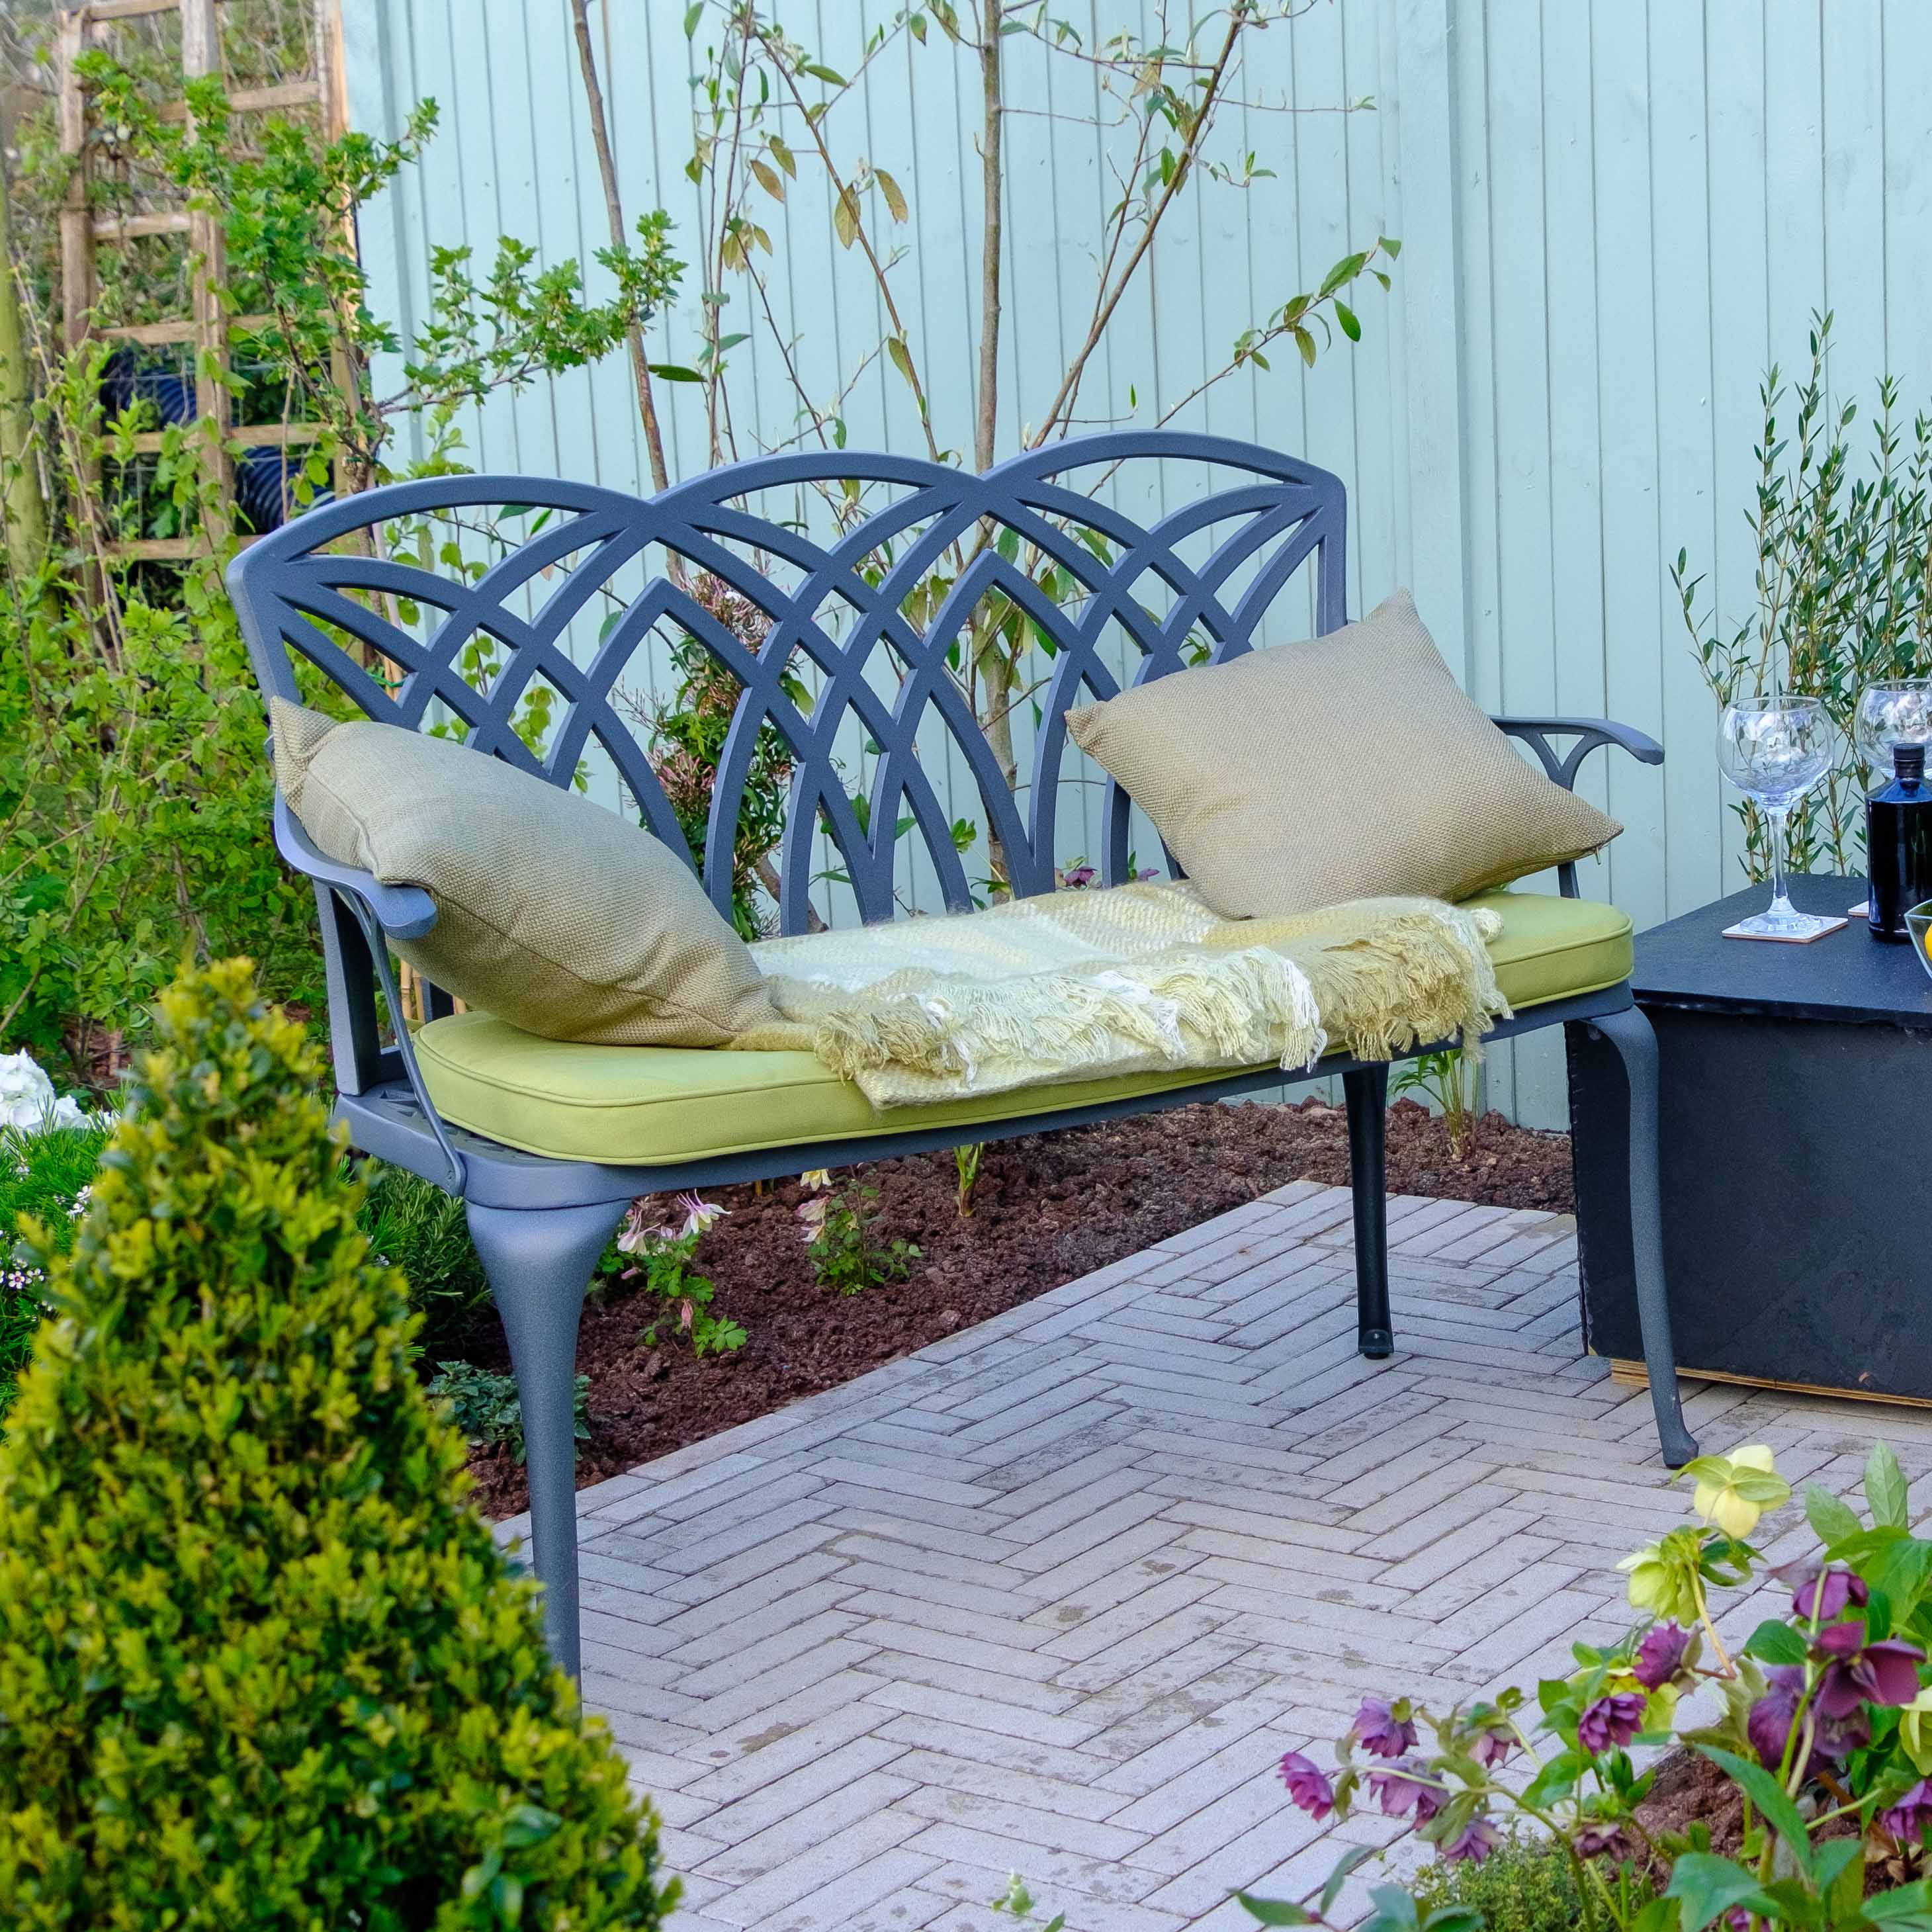 How to choose the best position for your garden bench?